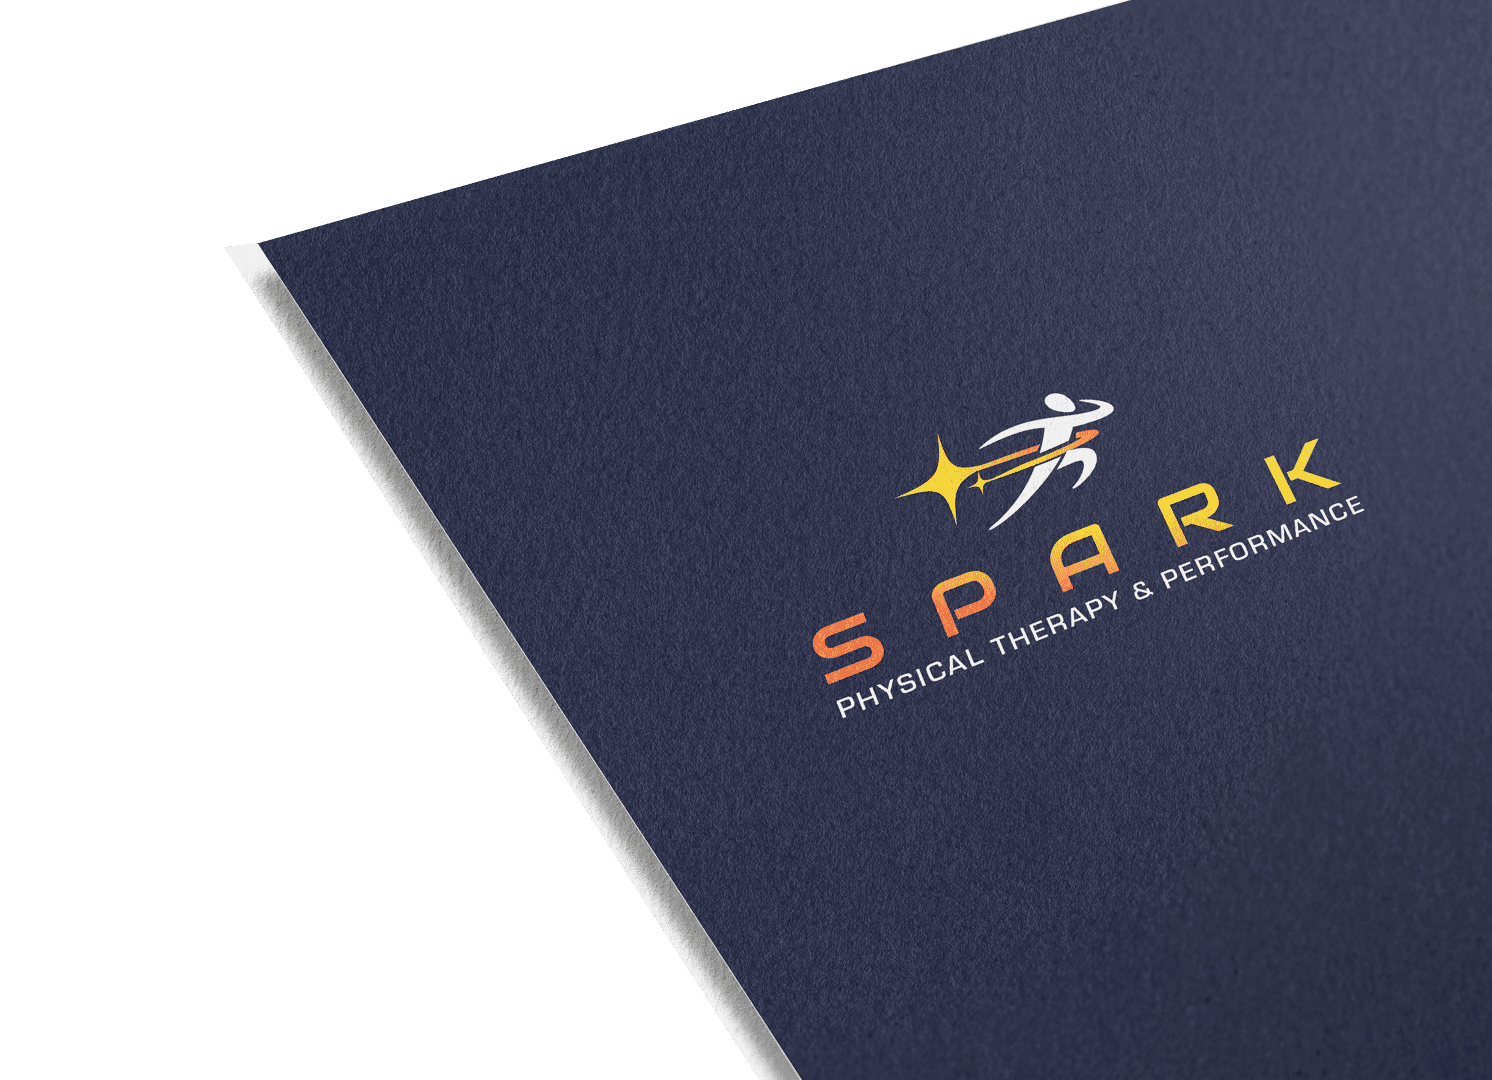 Logo-design-spark-physical-therapy